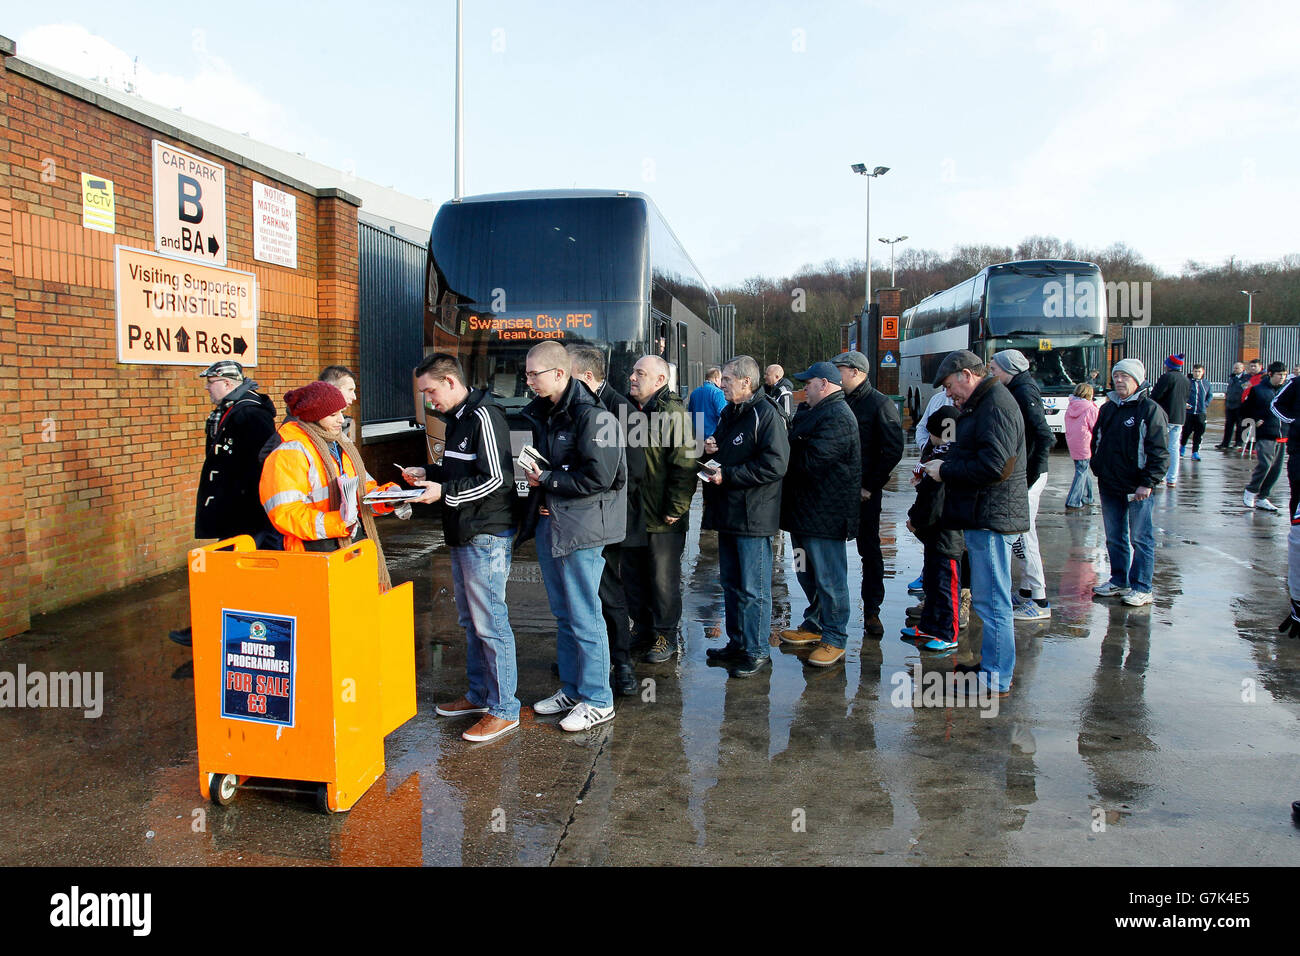 Swansea fans queuing for programmes at Ewood Park before the FA Cup Fourth Round match at Ewood Park, Blackburn. Stock Photo